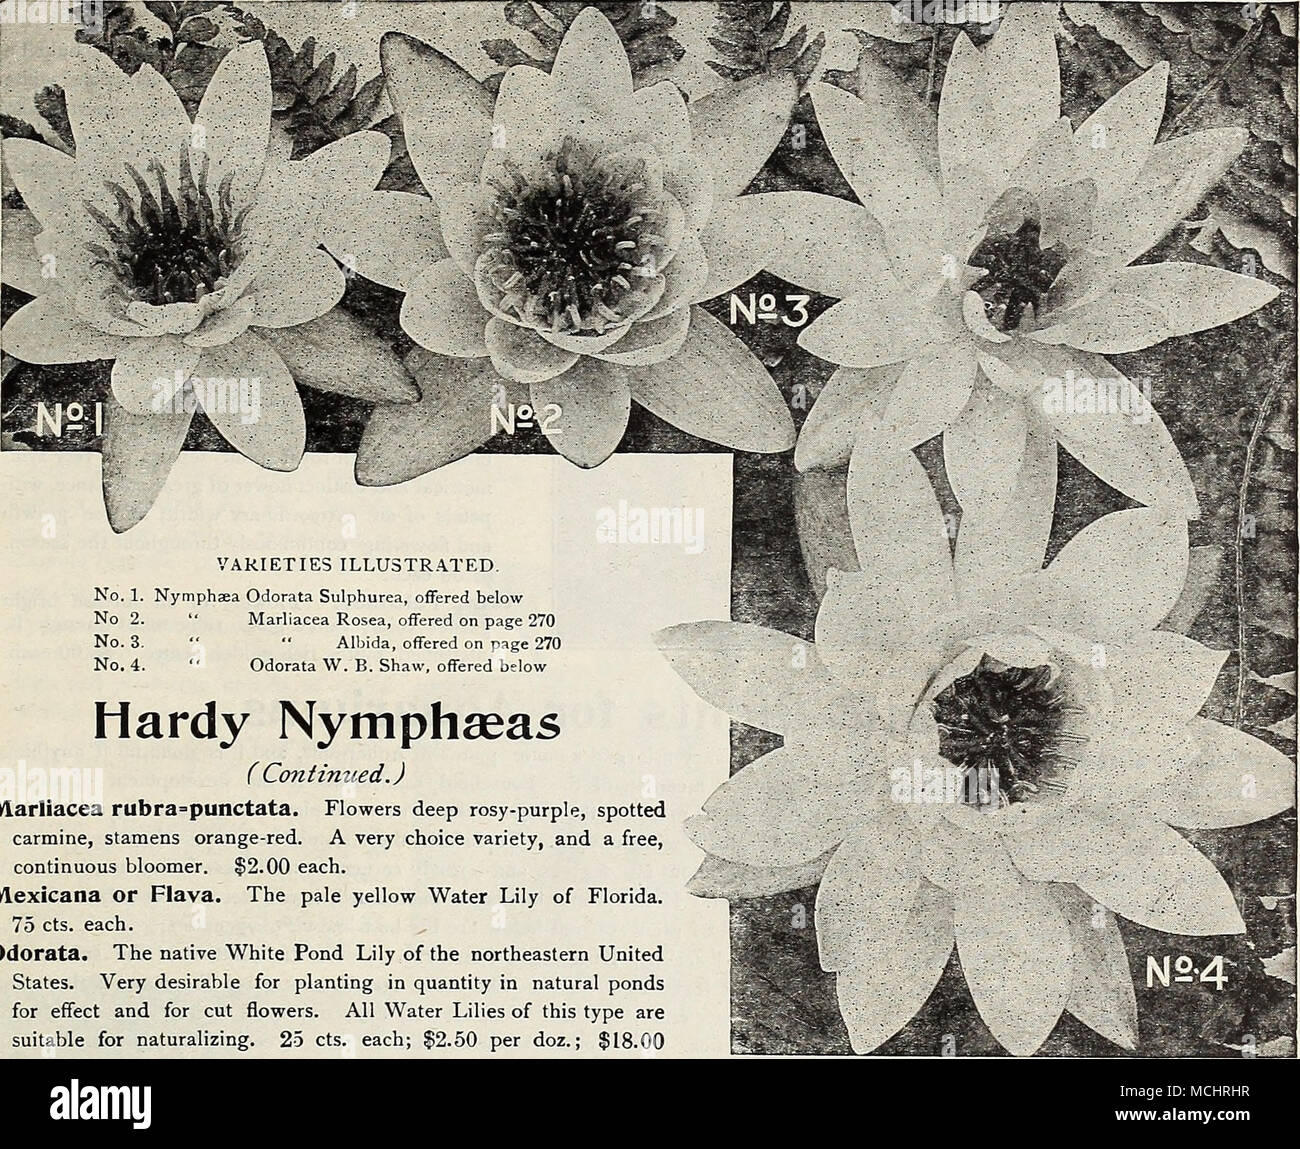 . No. 1. Nymphaea Odorata Sulphurea, offered below No 2. &quot; Marliacea Rosea, offered on page 270 No. 3. &quot; •* Albida, offered on page 270 No. 4. &quot; Odorata W. B. Shaw, offered below Hardy Nymphseas ( Contimied.) Marliacea rubra=punctata. Flowers deep rosy-purple, spotted carmine, stamens orange-red. A very choice variety, and a free, continuous bloomer. $2.00 each. Mexicana or Flava. The pale yellow Water Lily of Florida. 75 cts. each. Odorata. The native White Pond Lily of the northeastern United States. Very desirable for planting in quantity in natural ponds for effect and for c Stock Photo